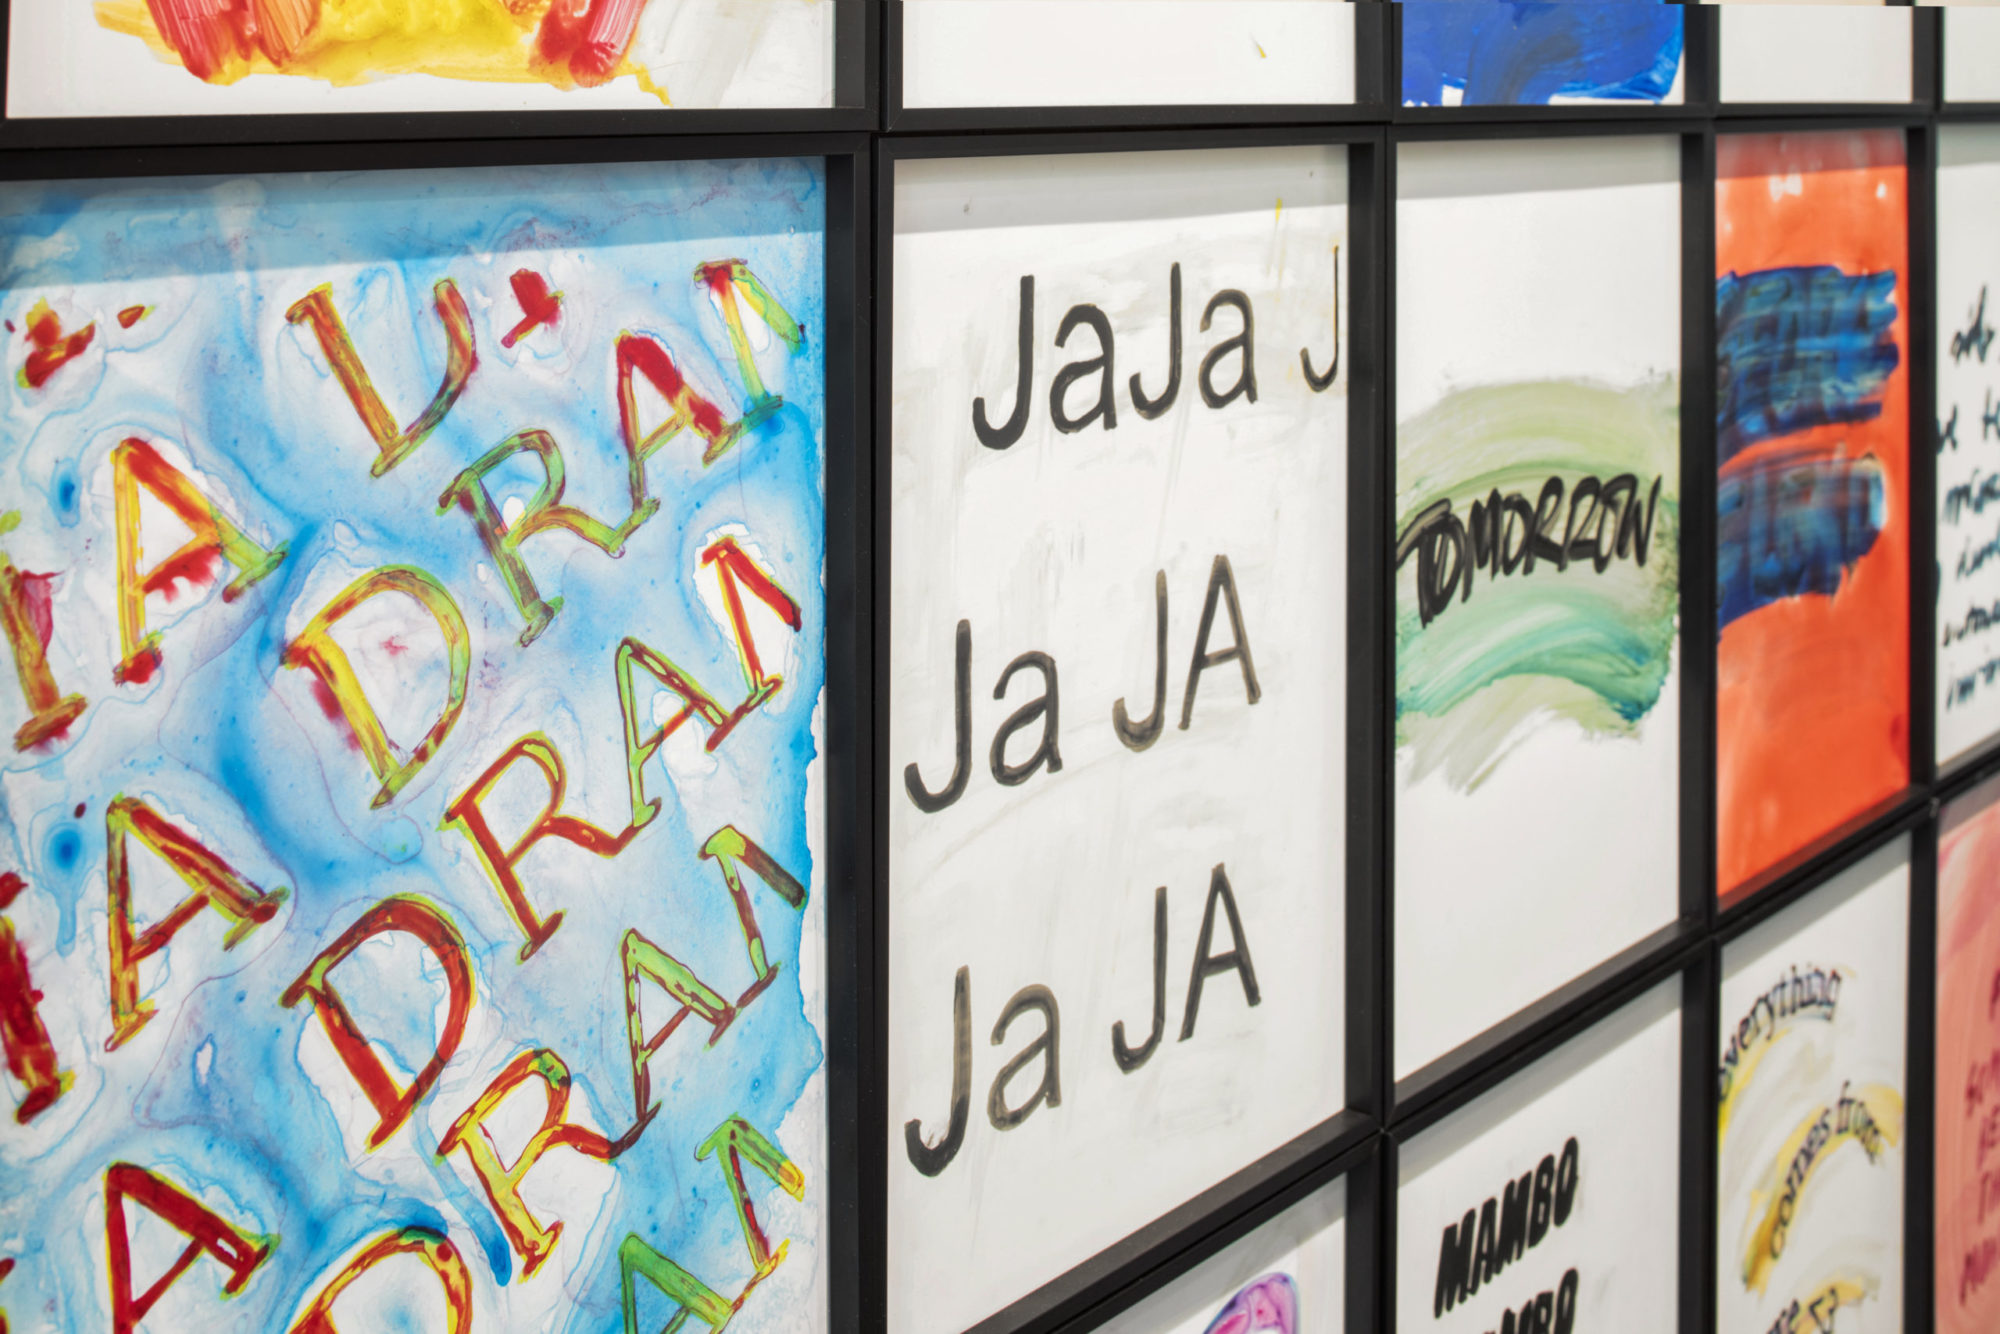 Close-up image of grid of mixed-media works combining brightly-colored, abstract, painted designs, and text in Spanish and English, including the words 